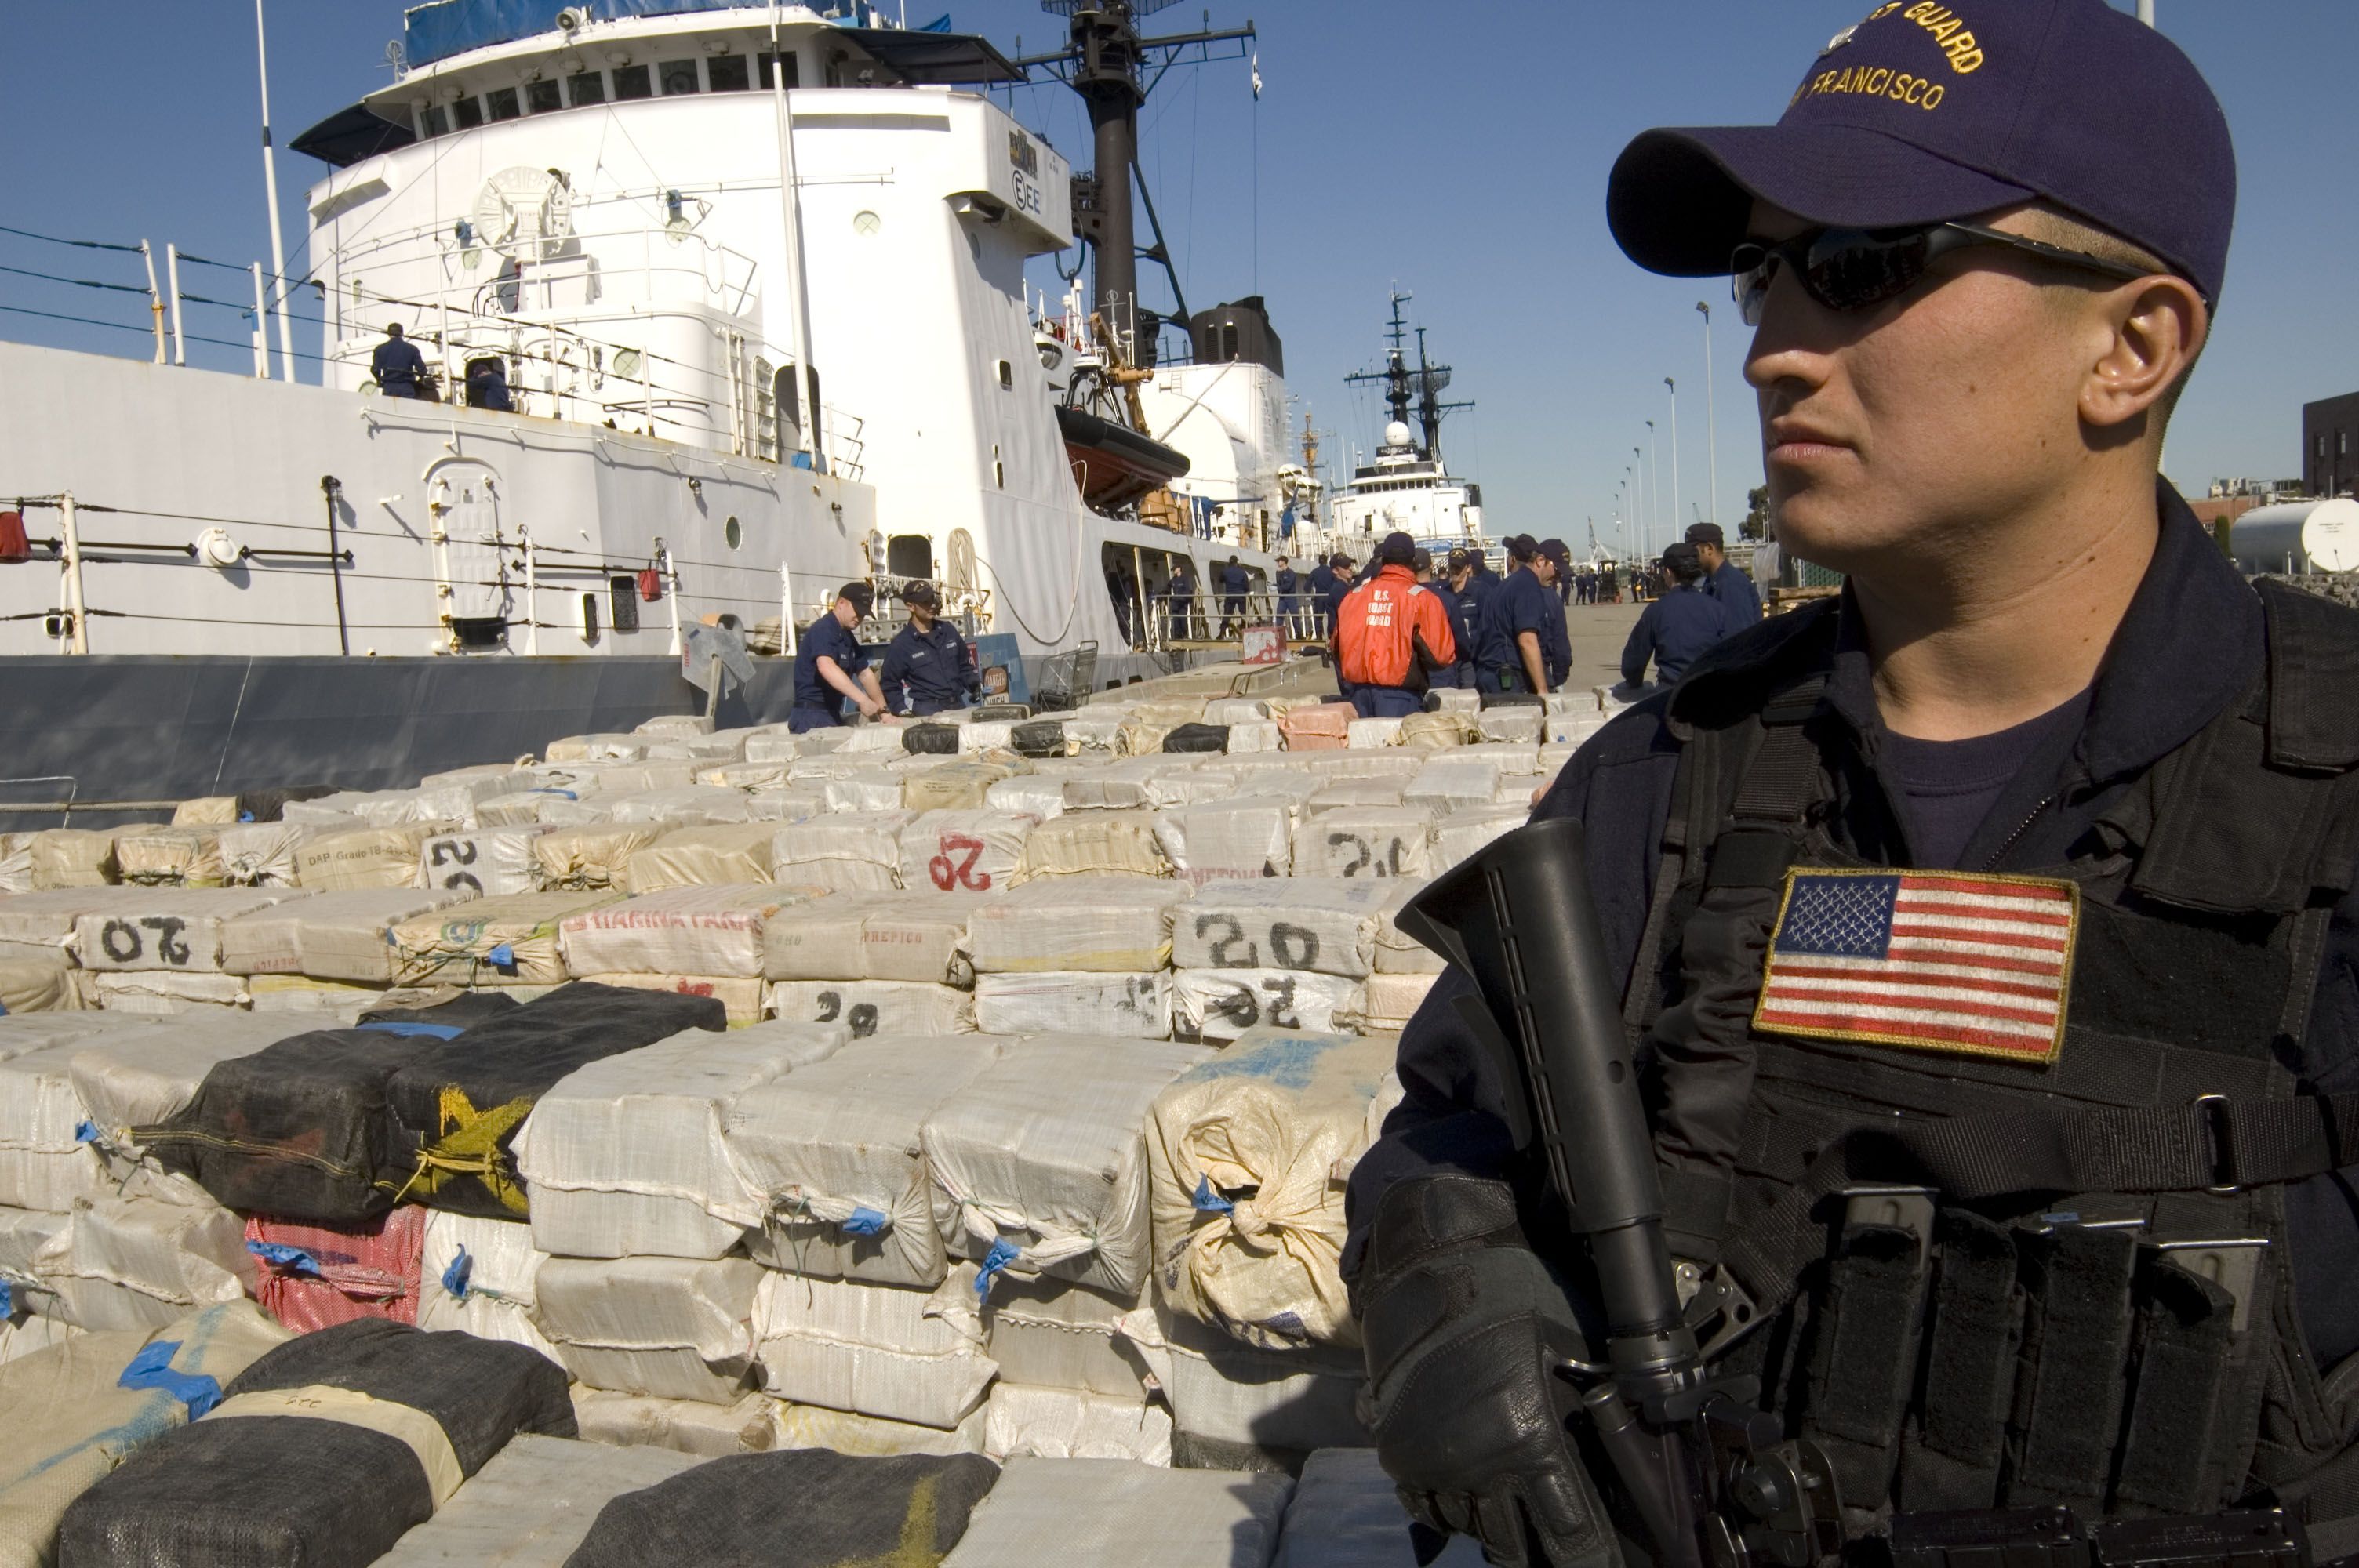 tons of cocaine seized by US Coast Guard, the free